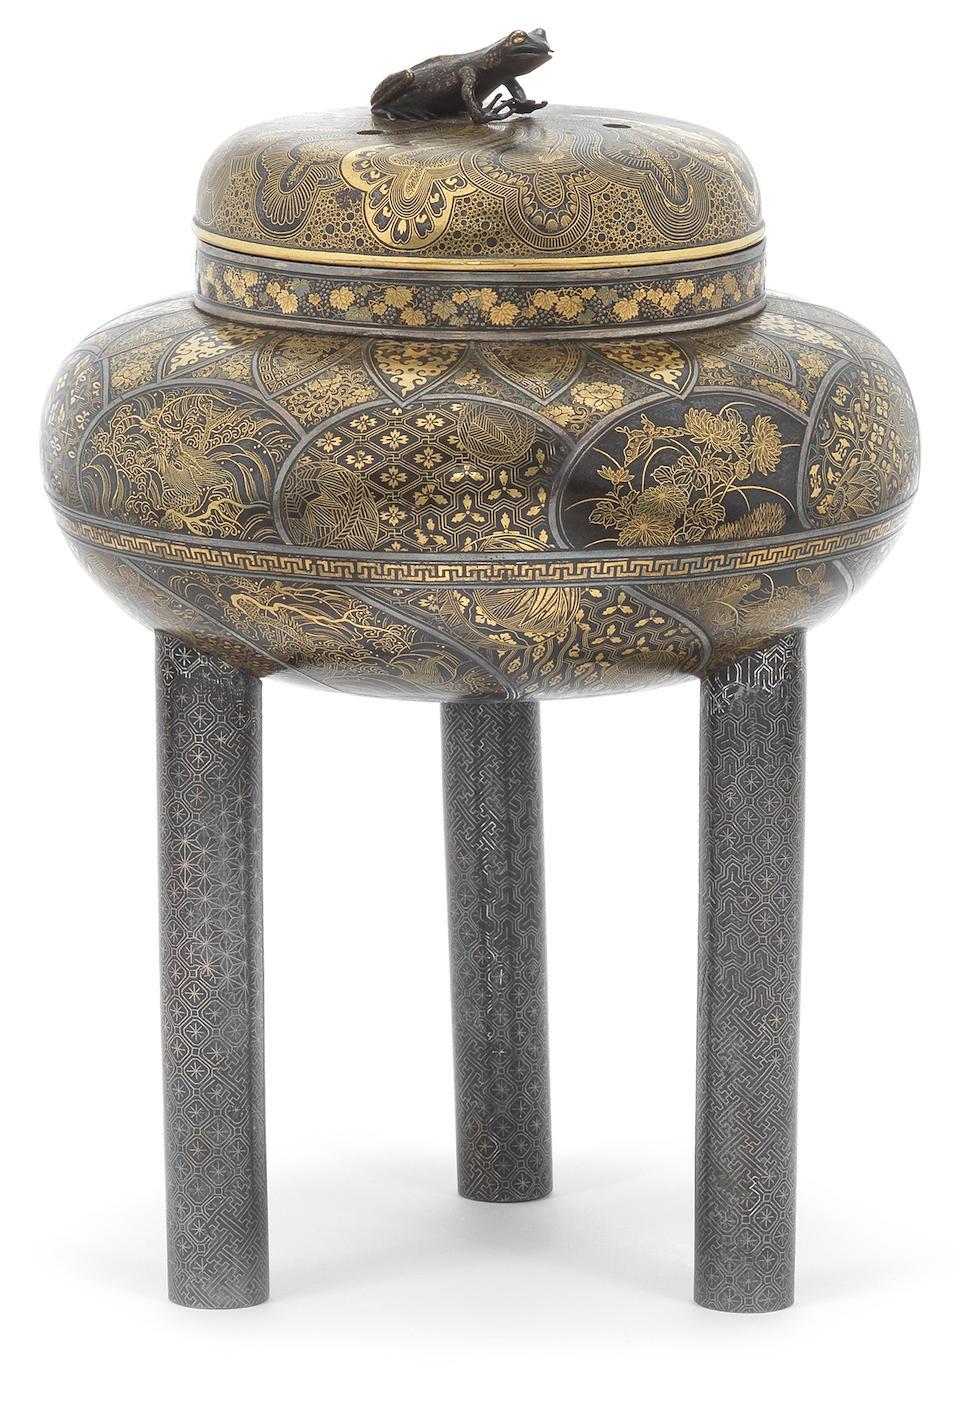 An inlaid iron koro (incense burner) and cover  By the Komai Company of Kyoto, Meiji Period  (3)